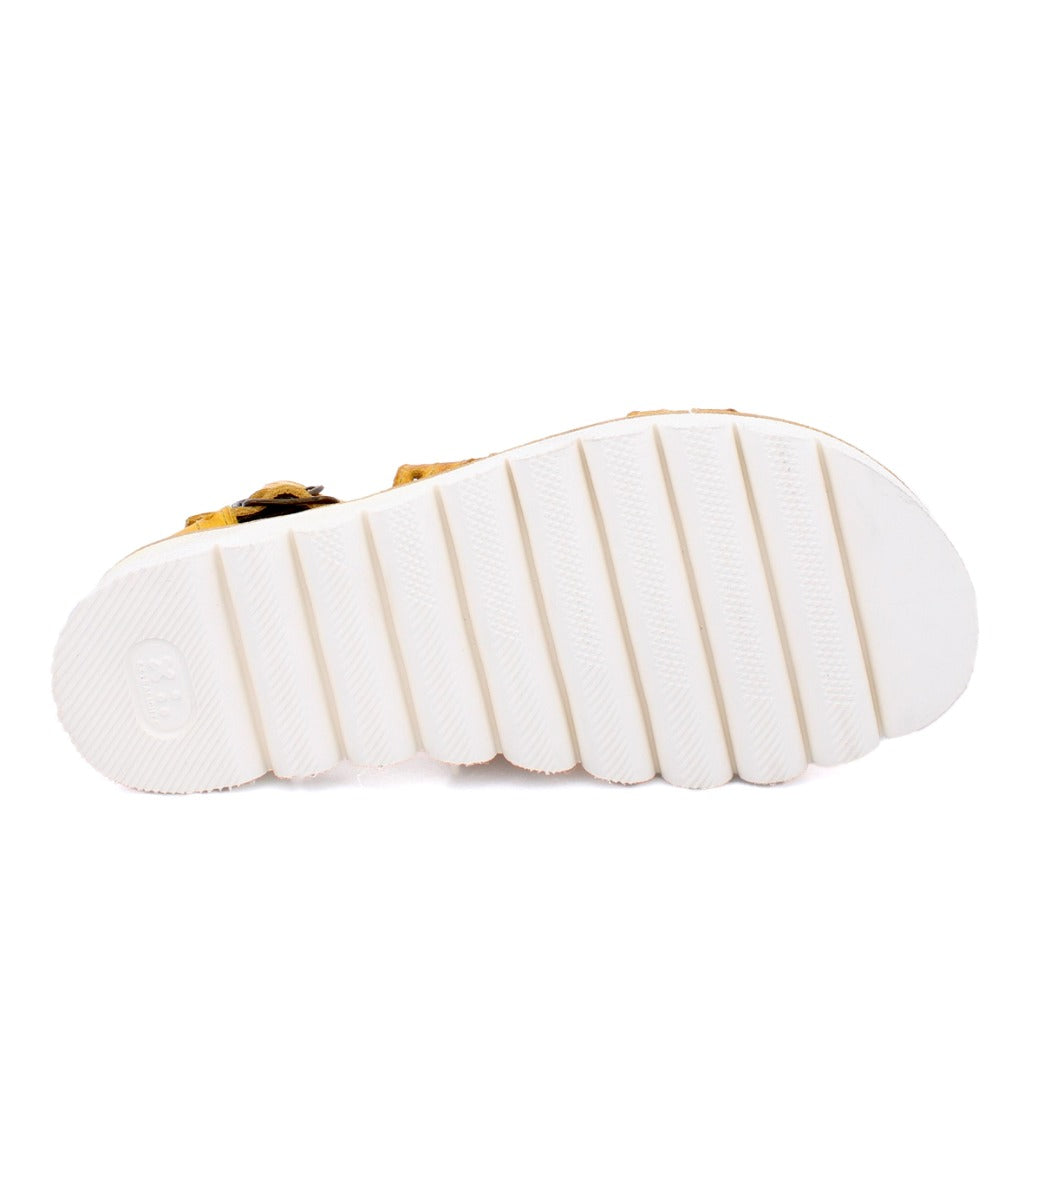 A pair of Camden sandals by Bed Stu on a white background.